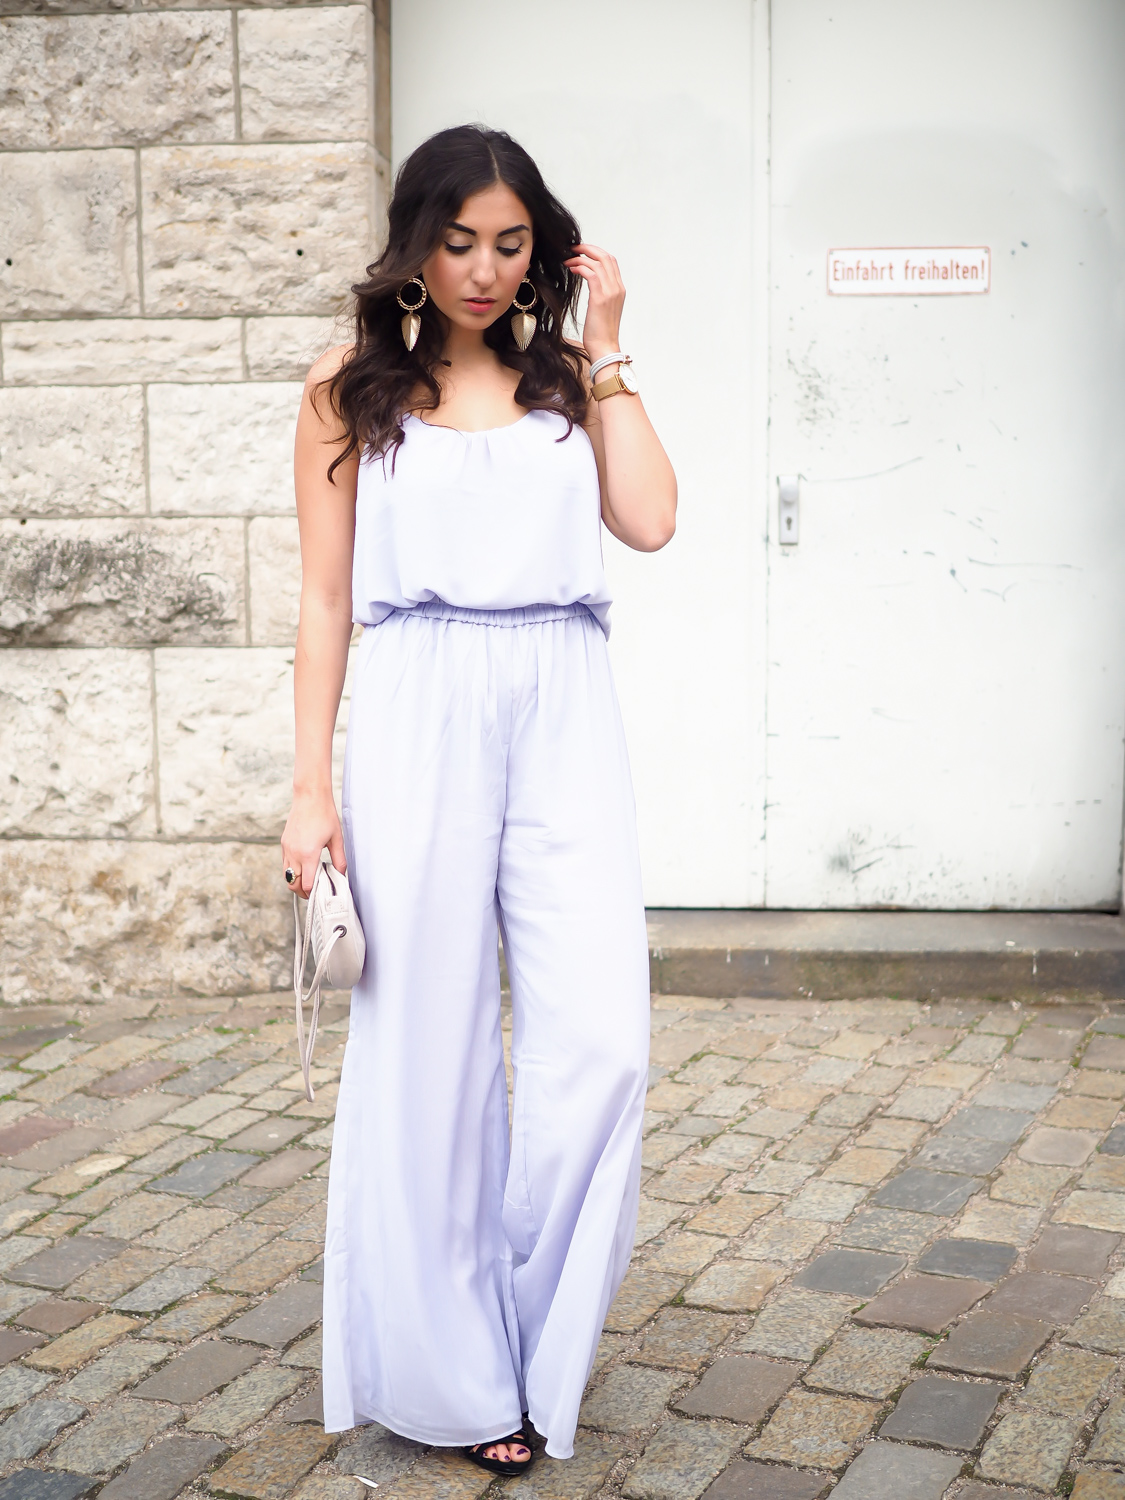 wpid-lilac-palazzo-pants-mango-strappy-top-hm-overall-wide-legs-trenchcoat-eleganz-night-out-big-earring-samieze-berlin-fashionblog-chic-streetstyle-summer-gala-event-11.jpg.jpeg